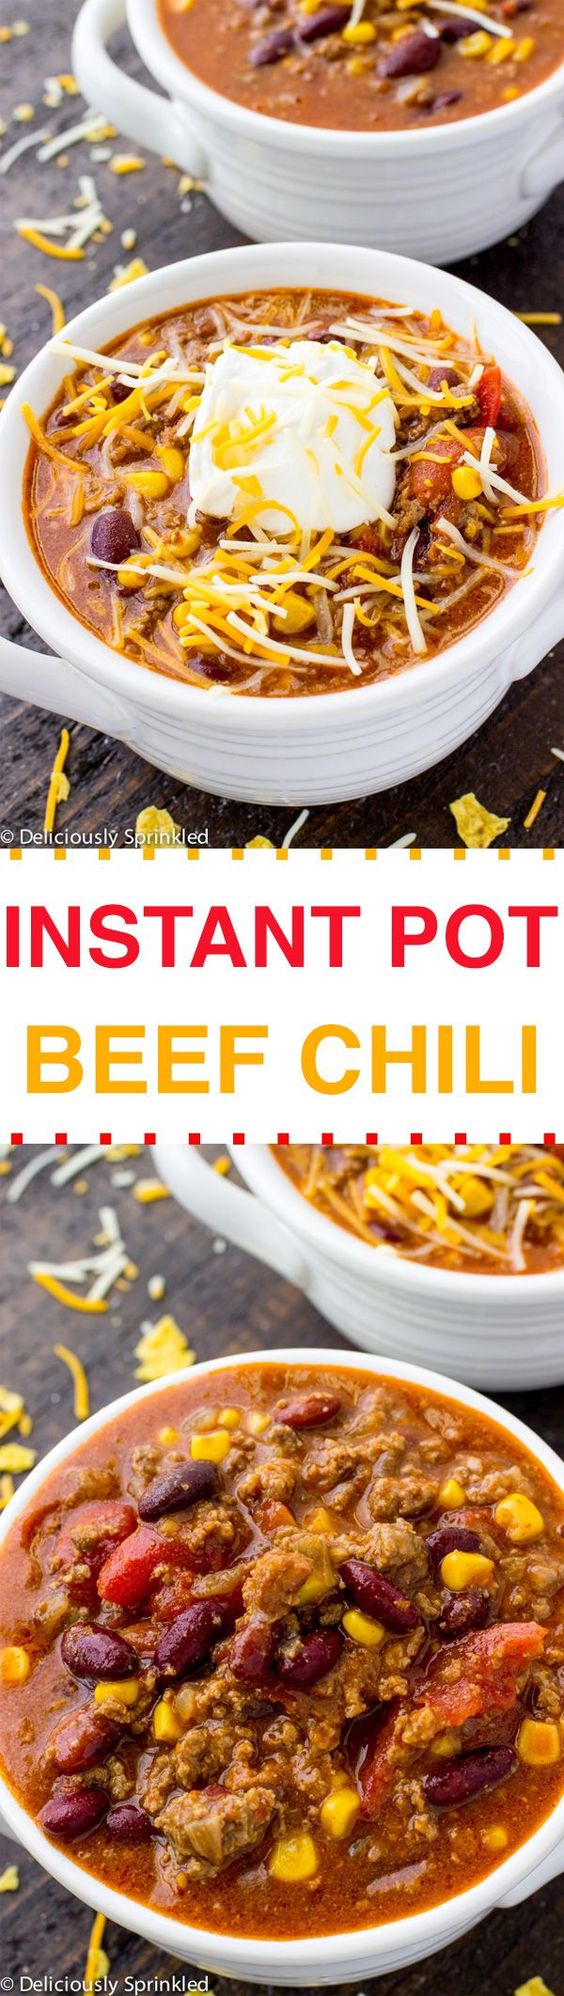 INSTANT POT BEEF CHILI | Deliciously Sprinkled